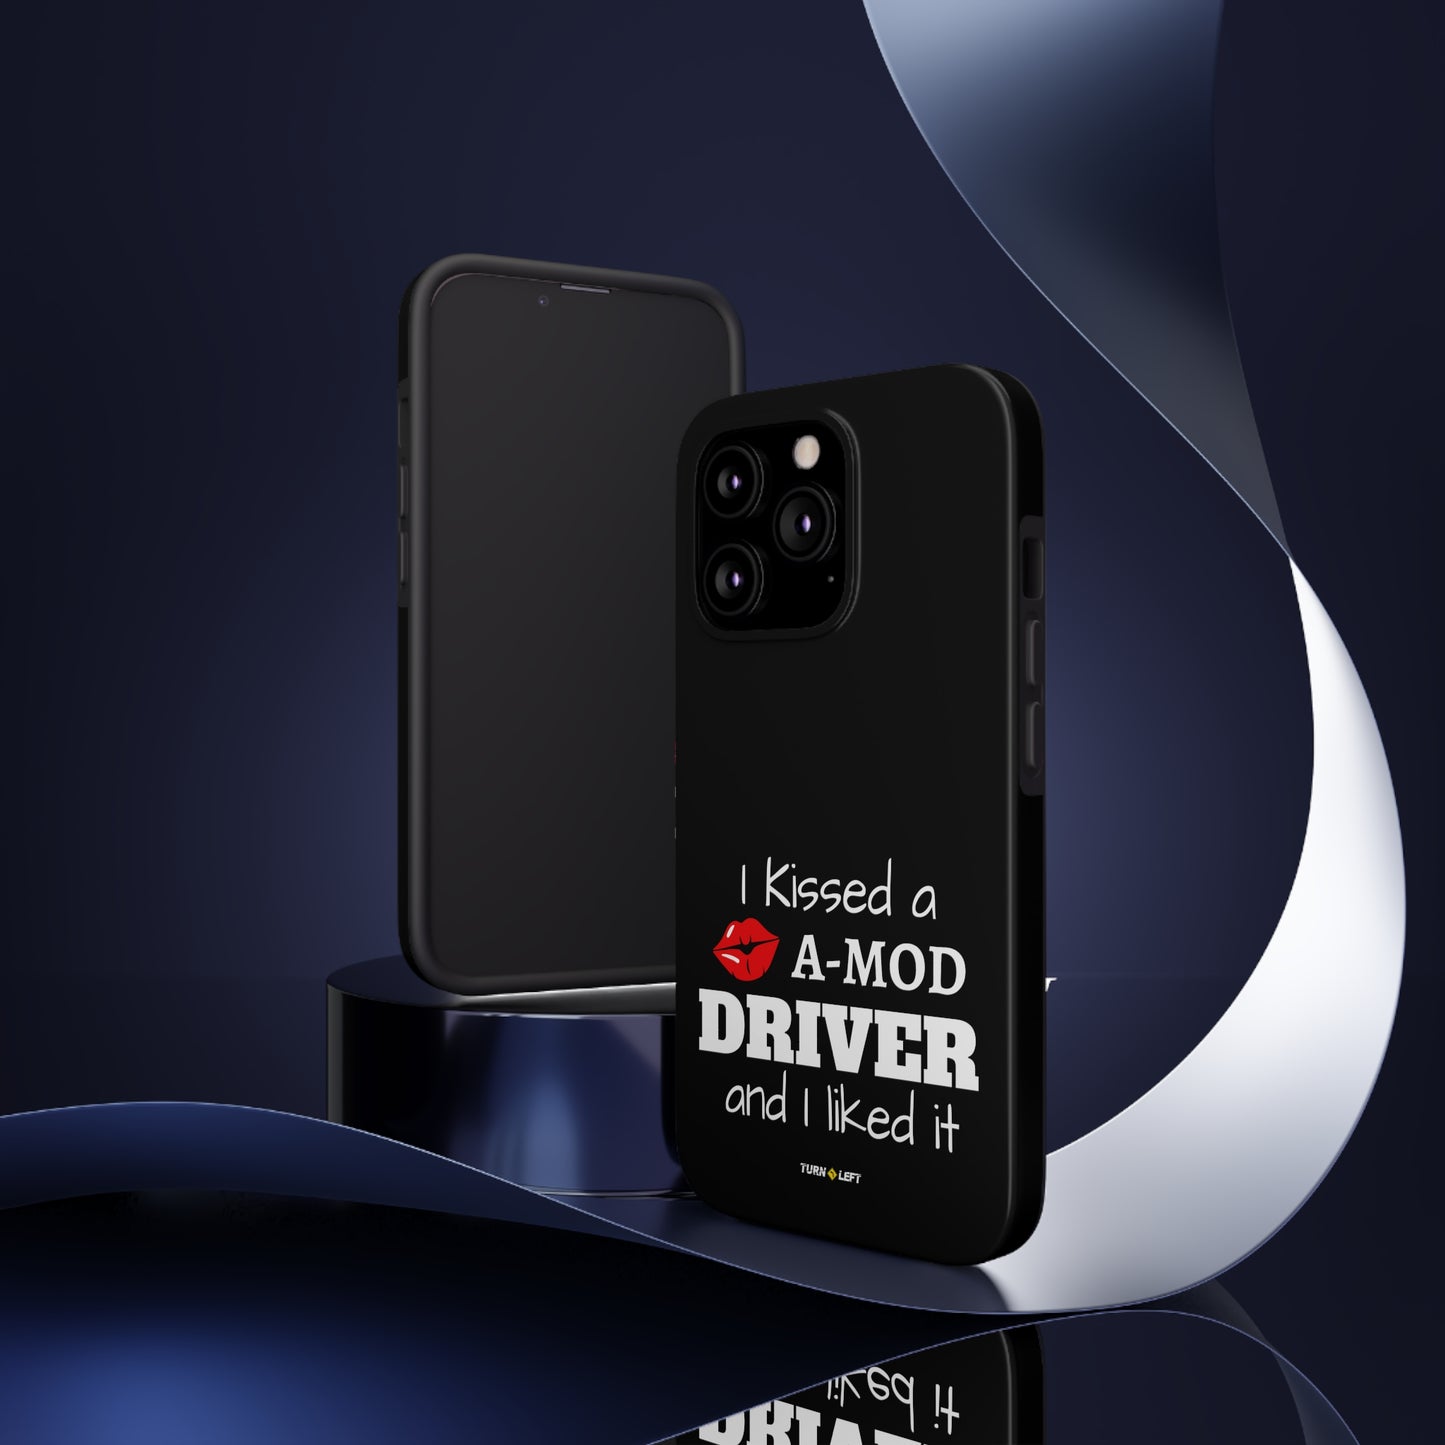 I Kissed A A-Mod Driver and I Liked It Tough Phone Cases